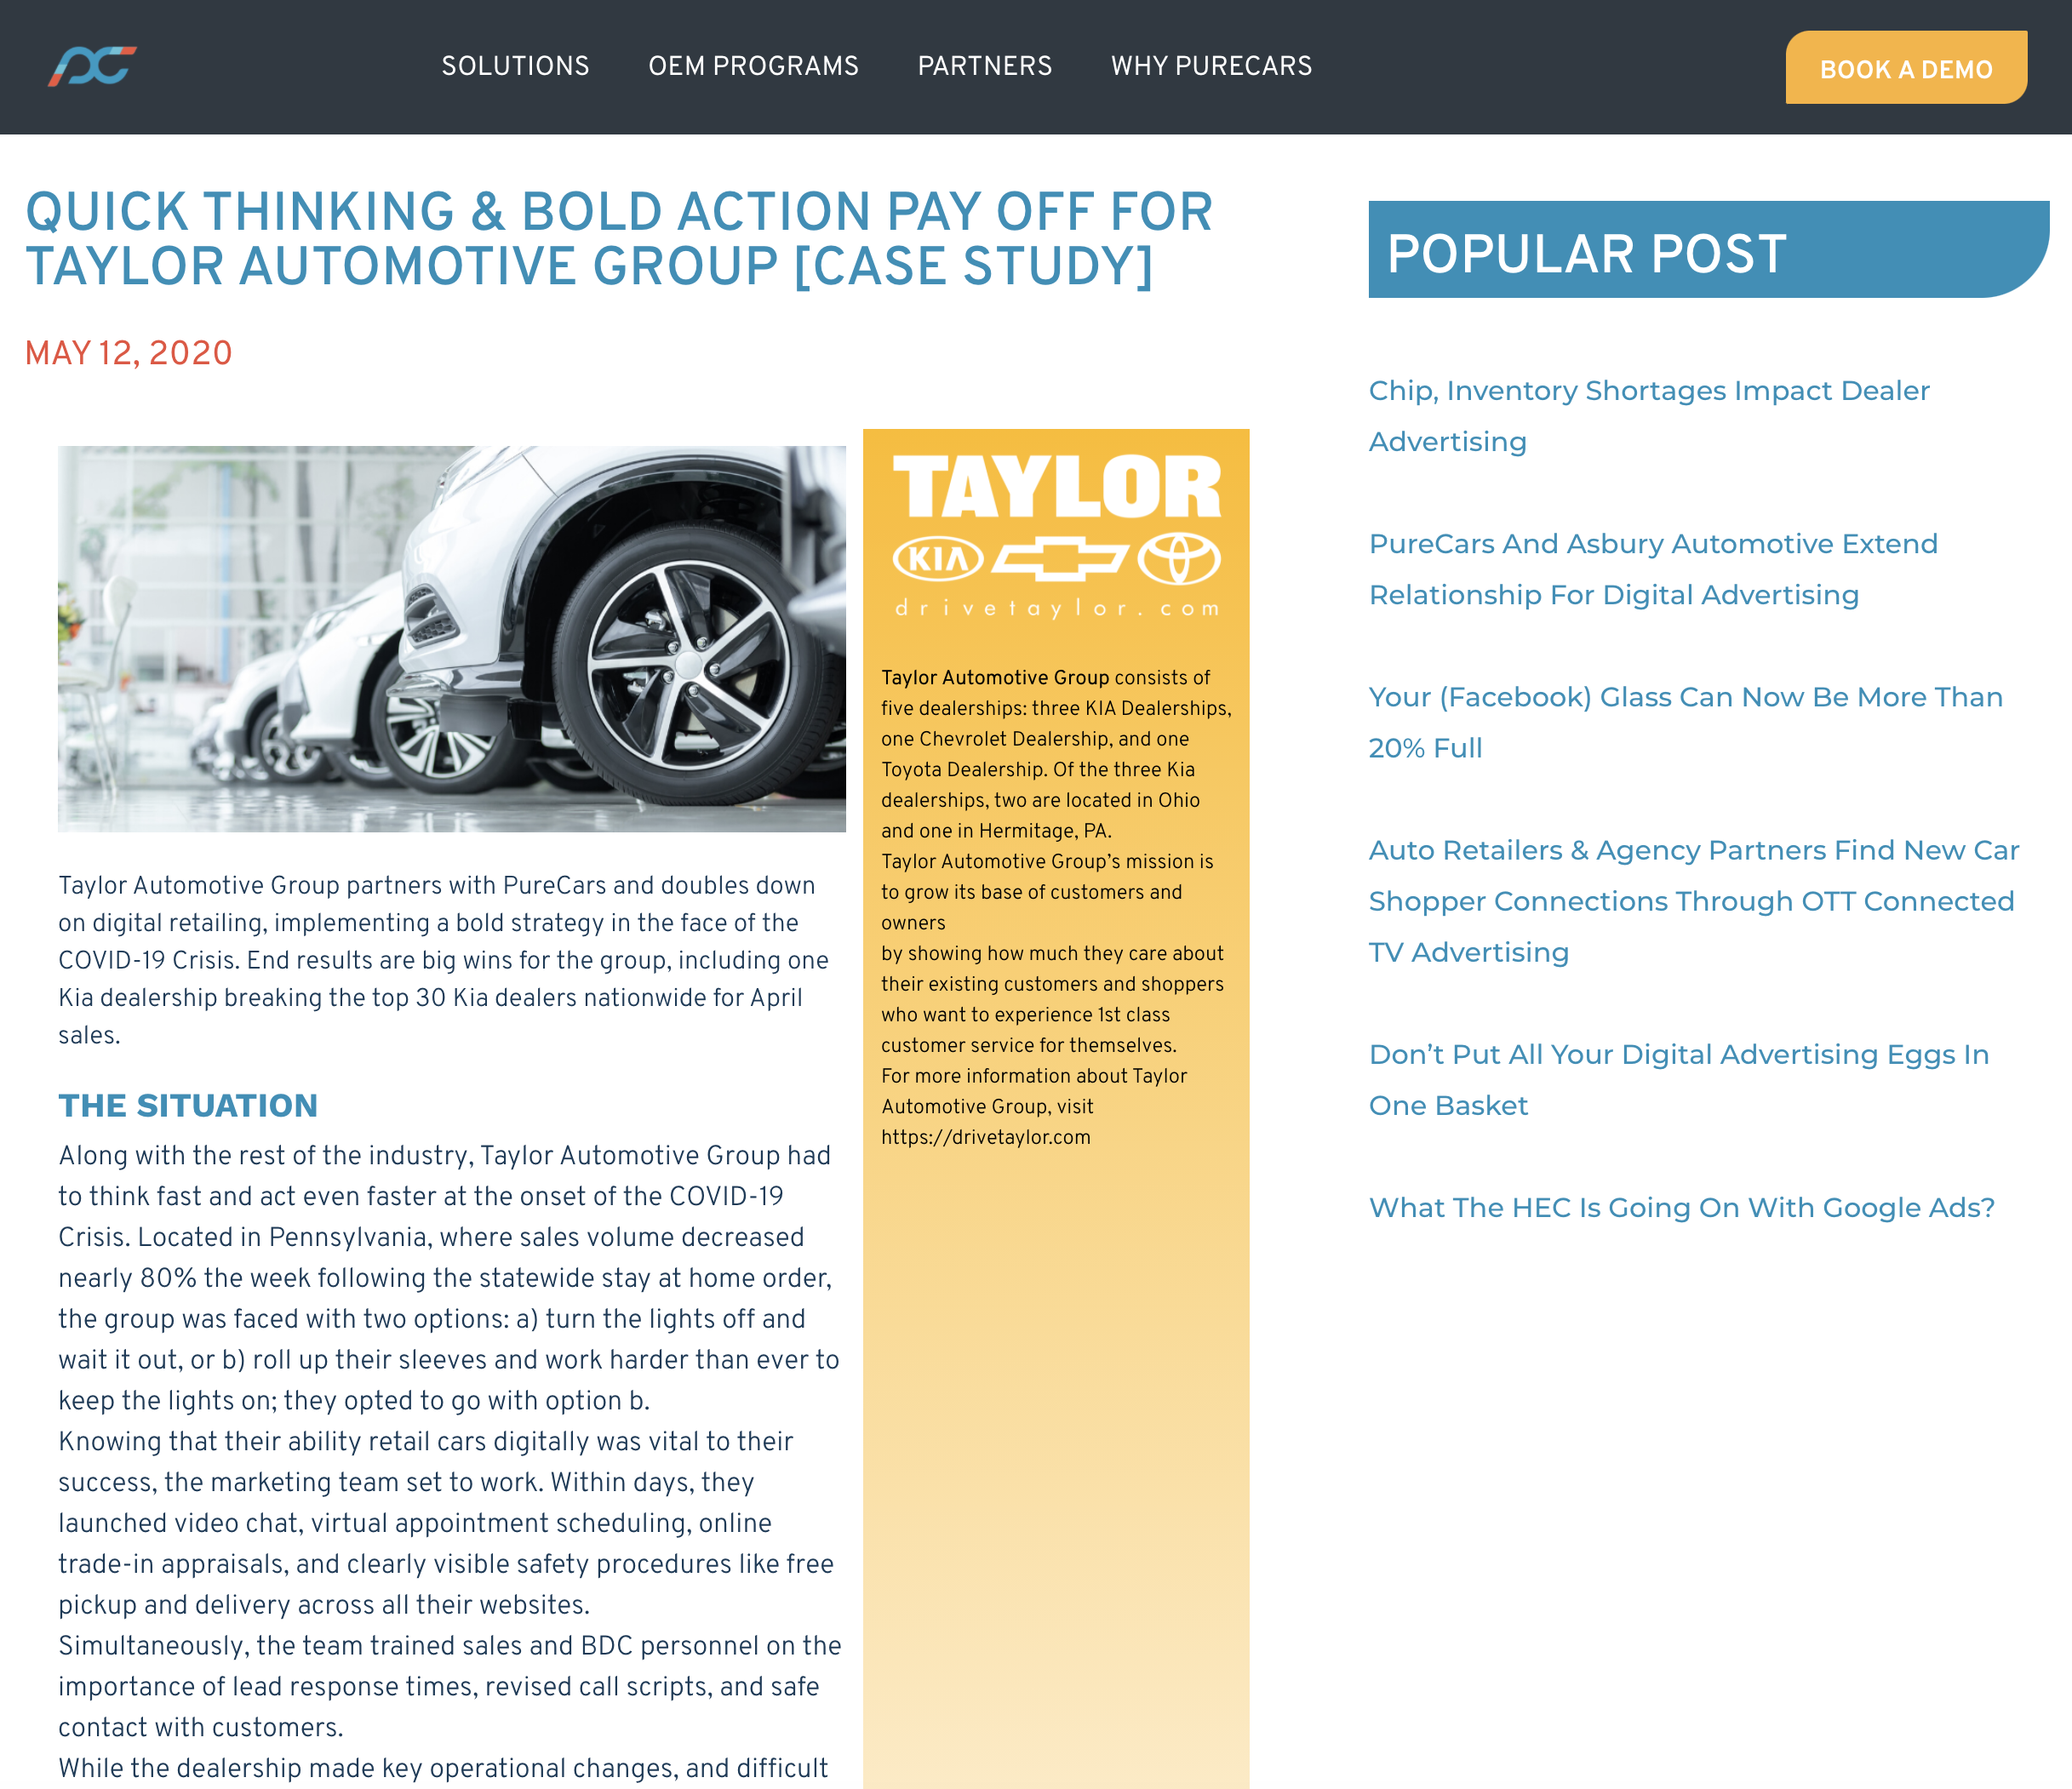 QUICK THINKING & BOLD ACTION PAY OFF FOR TAYLOR AUTOMOTIVE GROUP